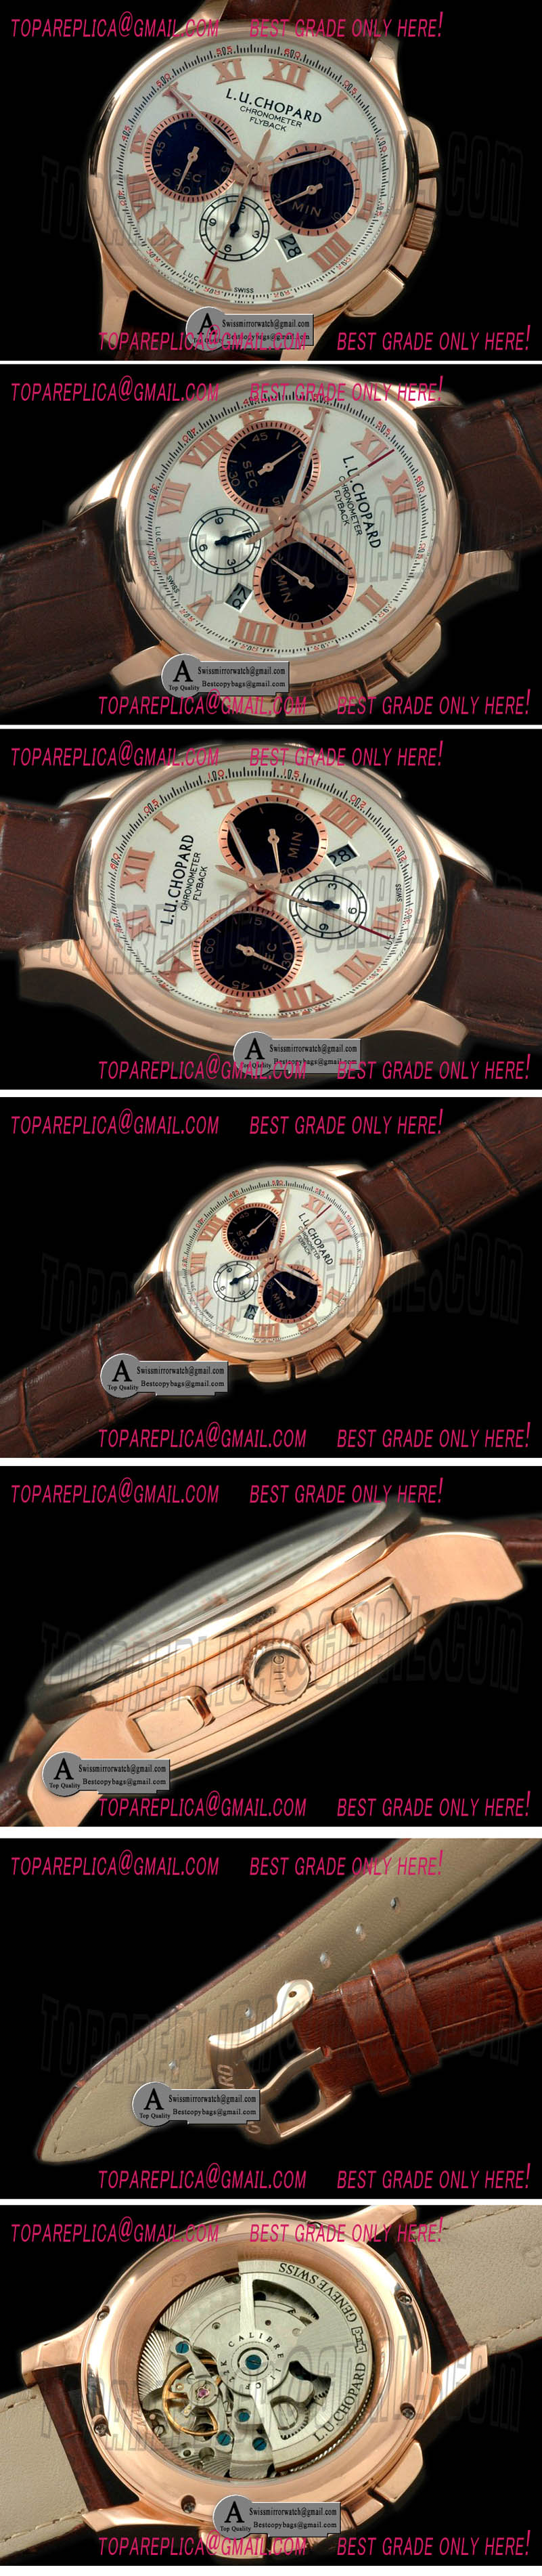 Chopard 161928-5001 LUC Chronograph Rose Gold/Leather White Asia 2813 Replica Watches